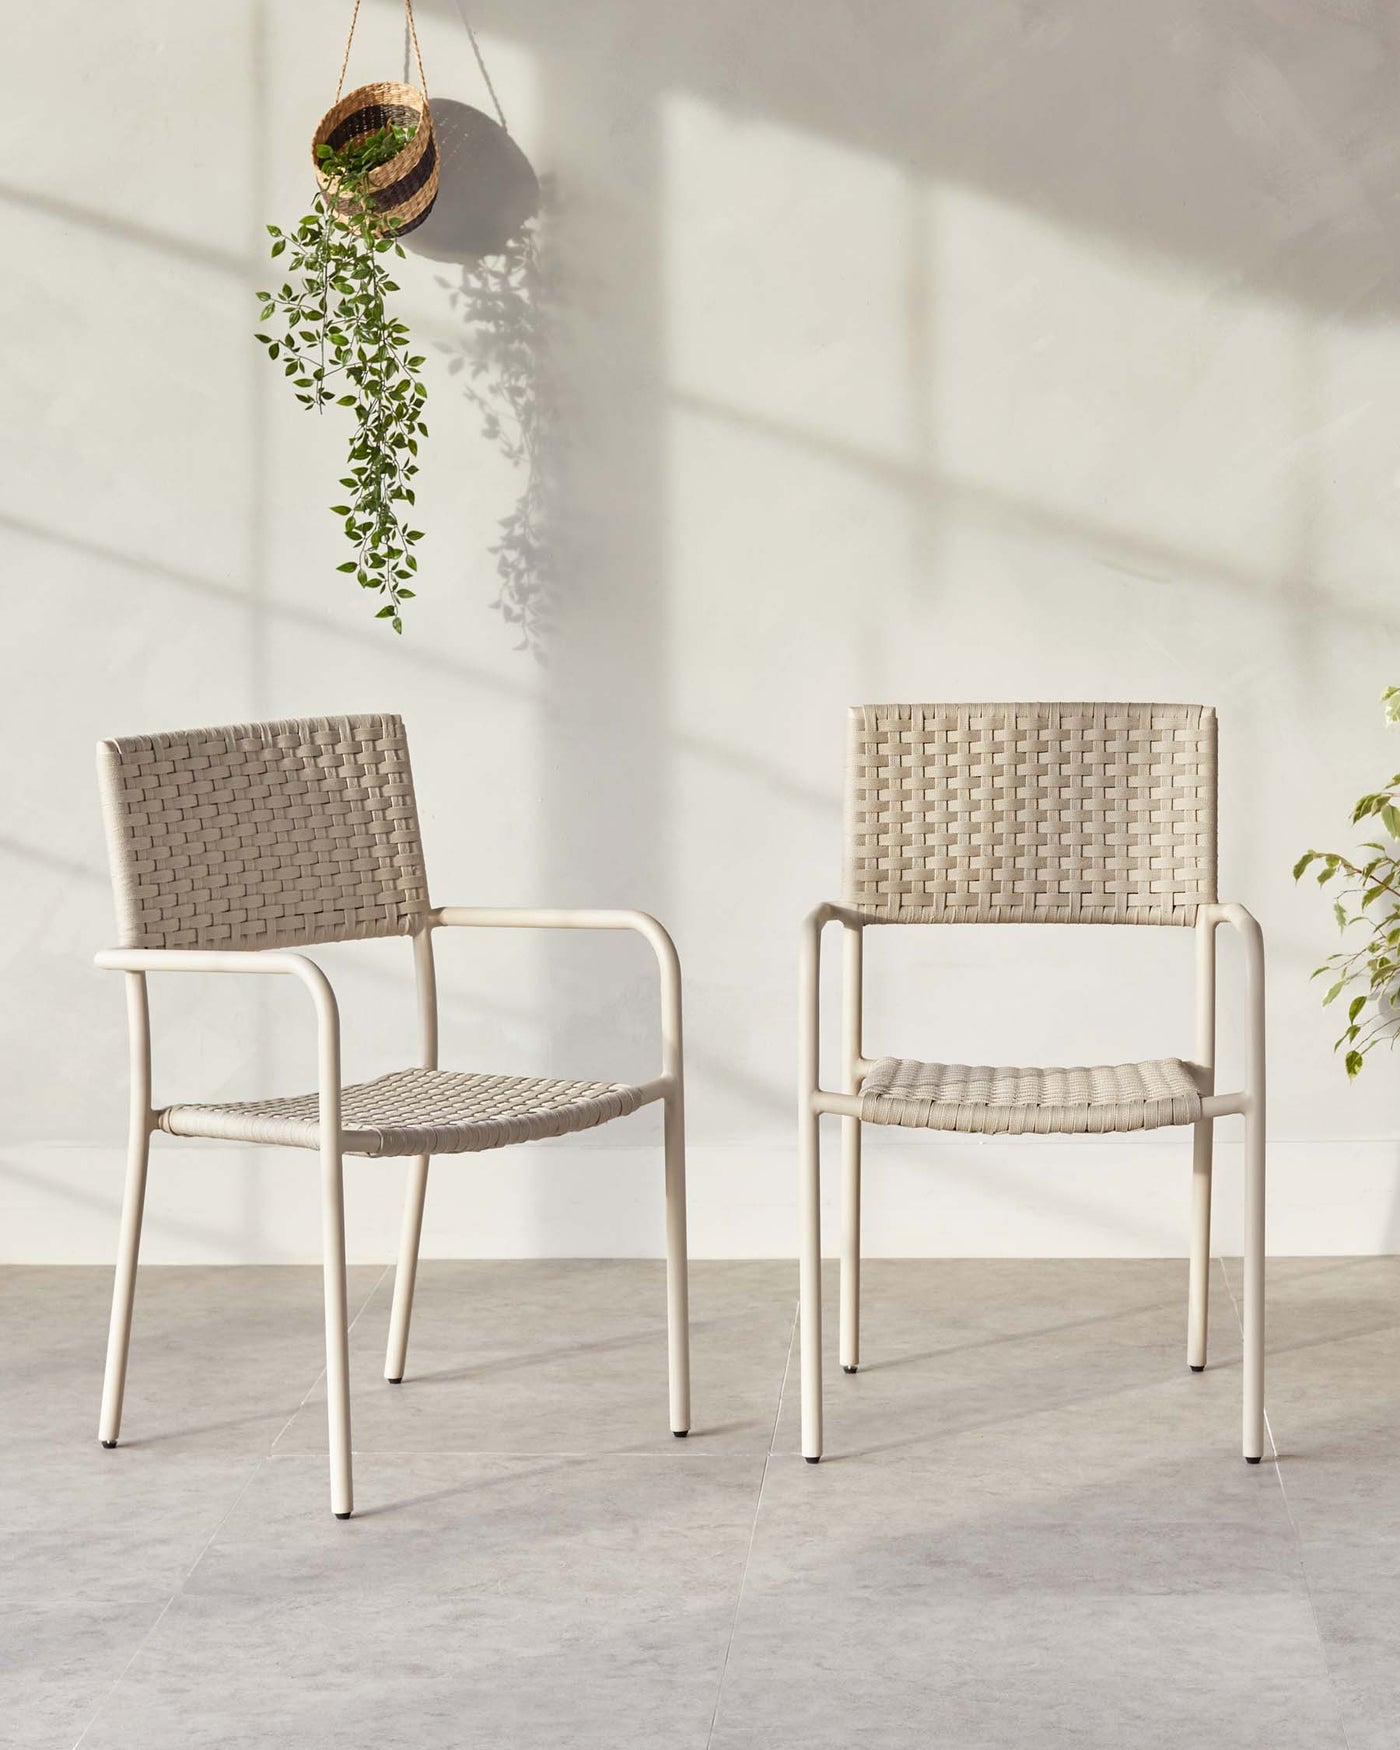 Two modern armchairs with white metal frames and woven taupe seats and backrests, showcased on a grey tiled floor against a white wall with shadow patterns from hanging plants.